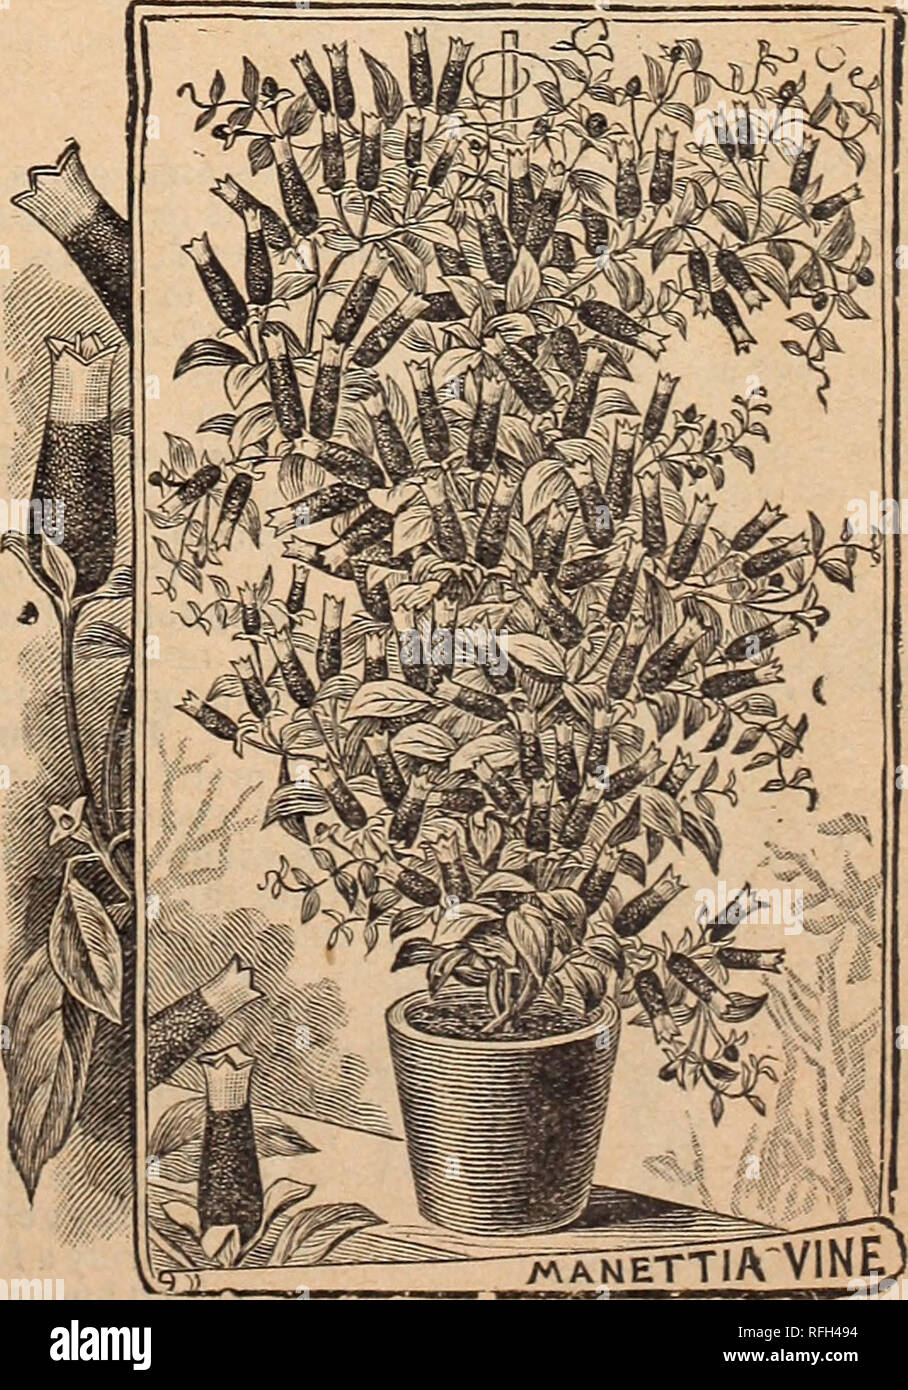 . I.N. Kramer &amp; Son, seedsmen and florists. Nursery stock Iowa Cedar Rapids Catalogs; Vegetables Seeds Catalogs; Flowers Seeds Catalogs; Gardening Equipment and supplies Catalogs. Leonotus Leonorus. Lily. cate rose to a bright crimson; very fra- grant. 25c. Lobelia. One of the best and most showy vase and basket plants; also fine bedders and excellent for ribbon lines; dwarf and free blooming; flowers blue. 10c; Si per dozen. Lotus Pelyorensis. {Coral Gem.) Its cylinder branching habit is most striking, and the silvery foliage even more so. Without its flowers it might almost be described  Stock Photo